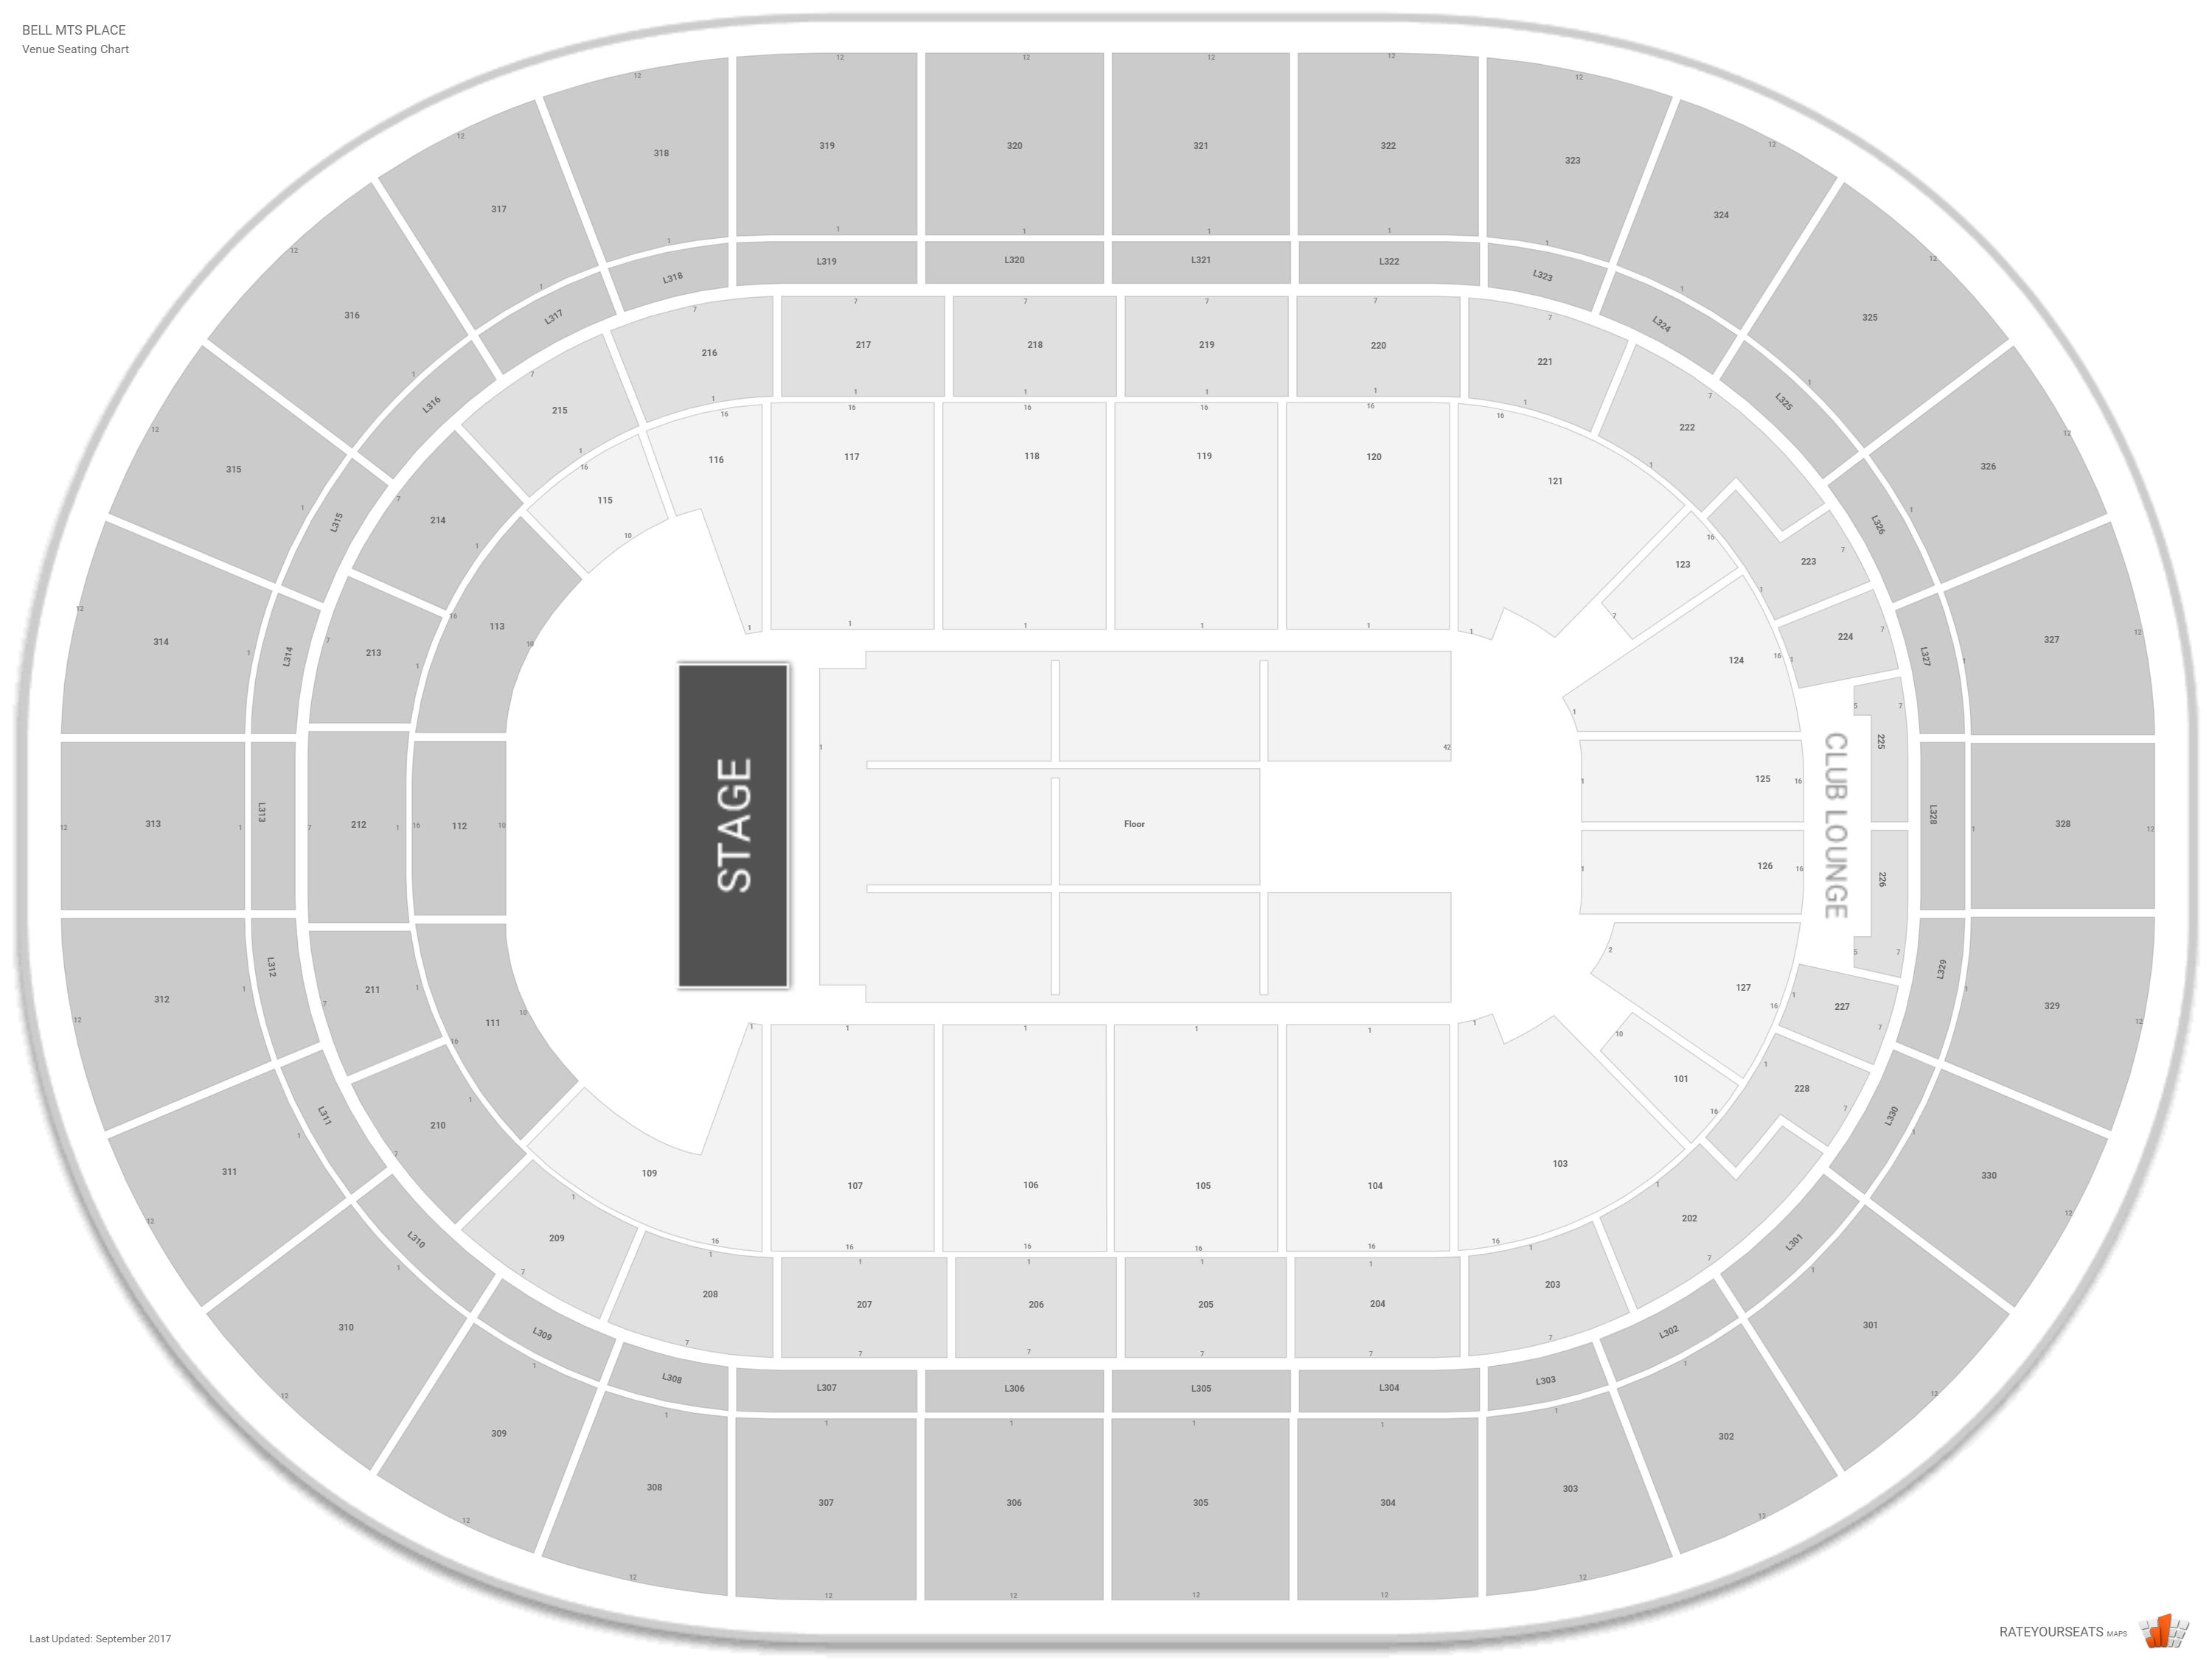 Winnipeg Jets Seating Chart With Seat Numbers